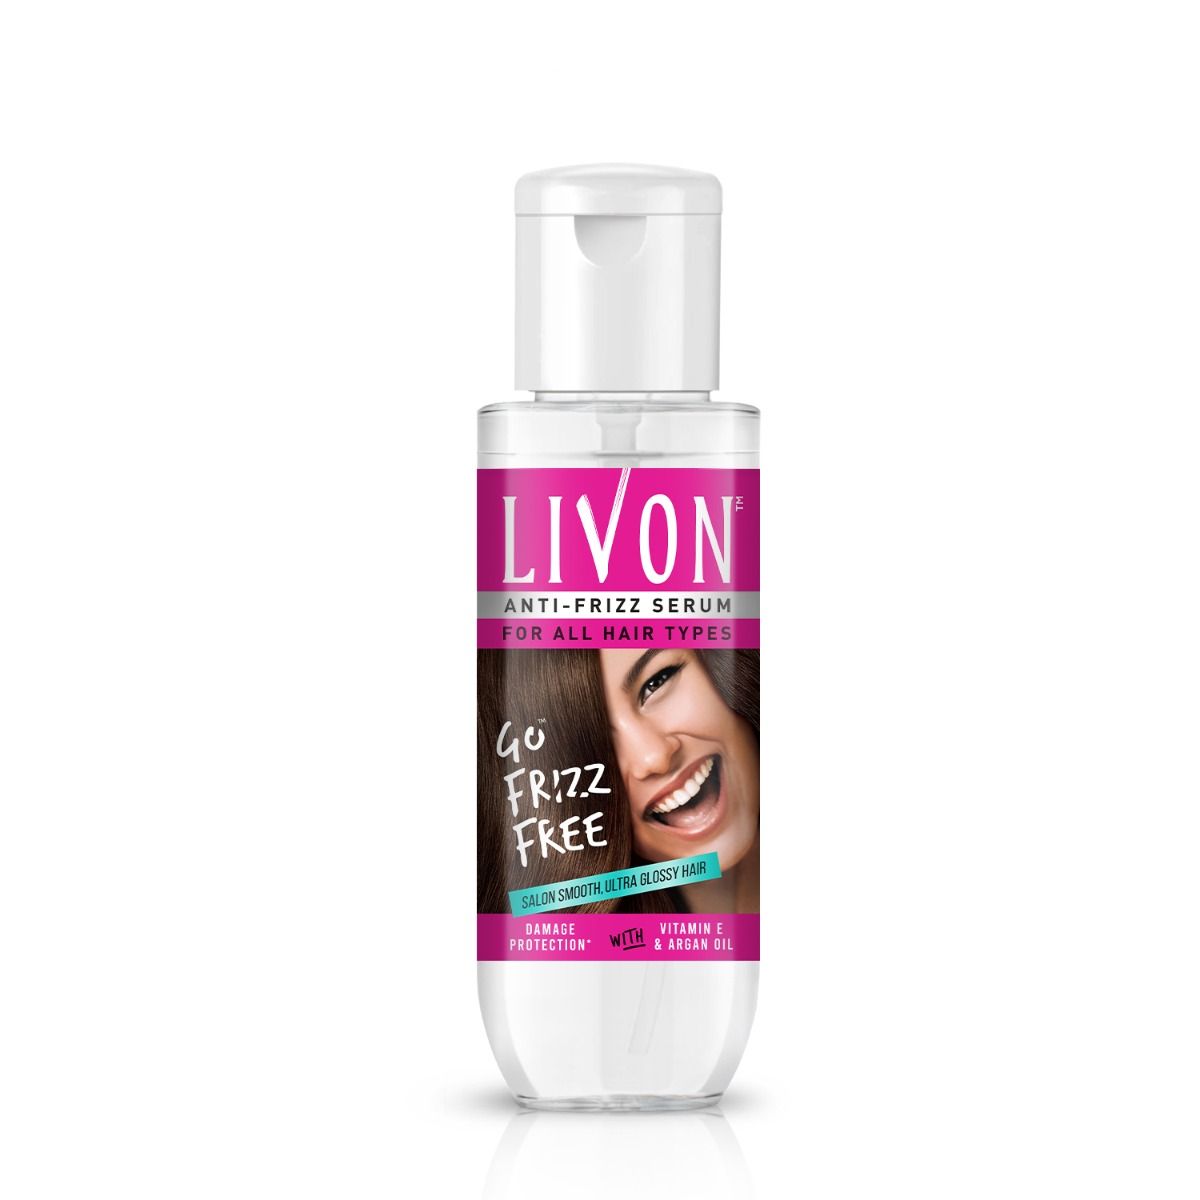 Livon Anti-Frizz Serum For All Hair Types, 100 ml Price, Uses, Side  Effects, Composition - Apollo Pharmacy